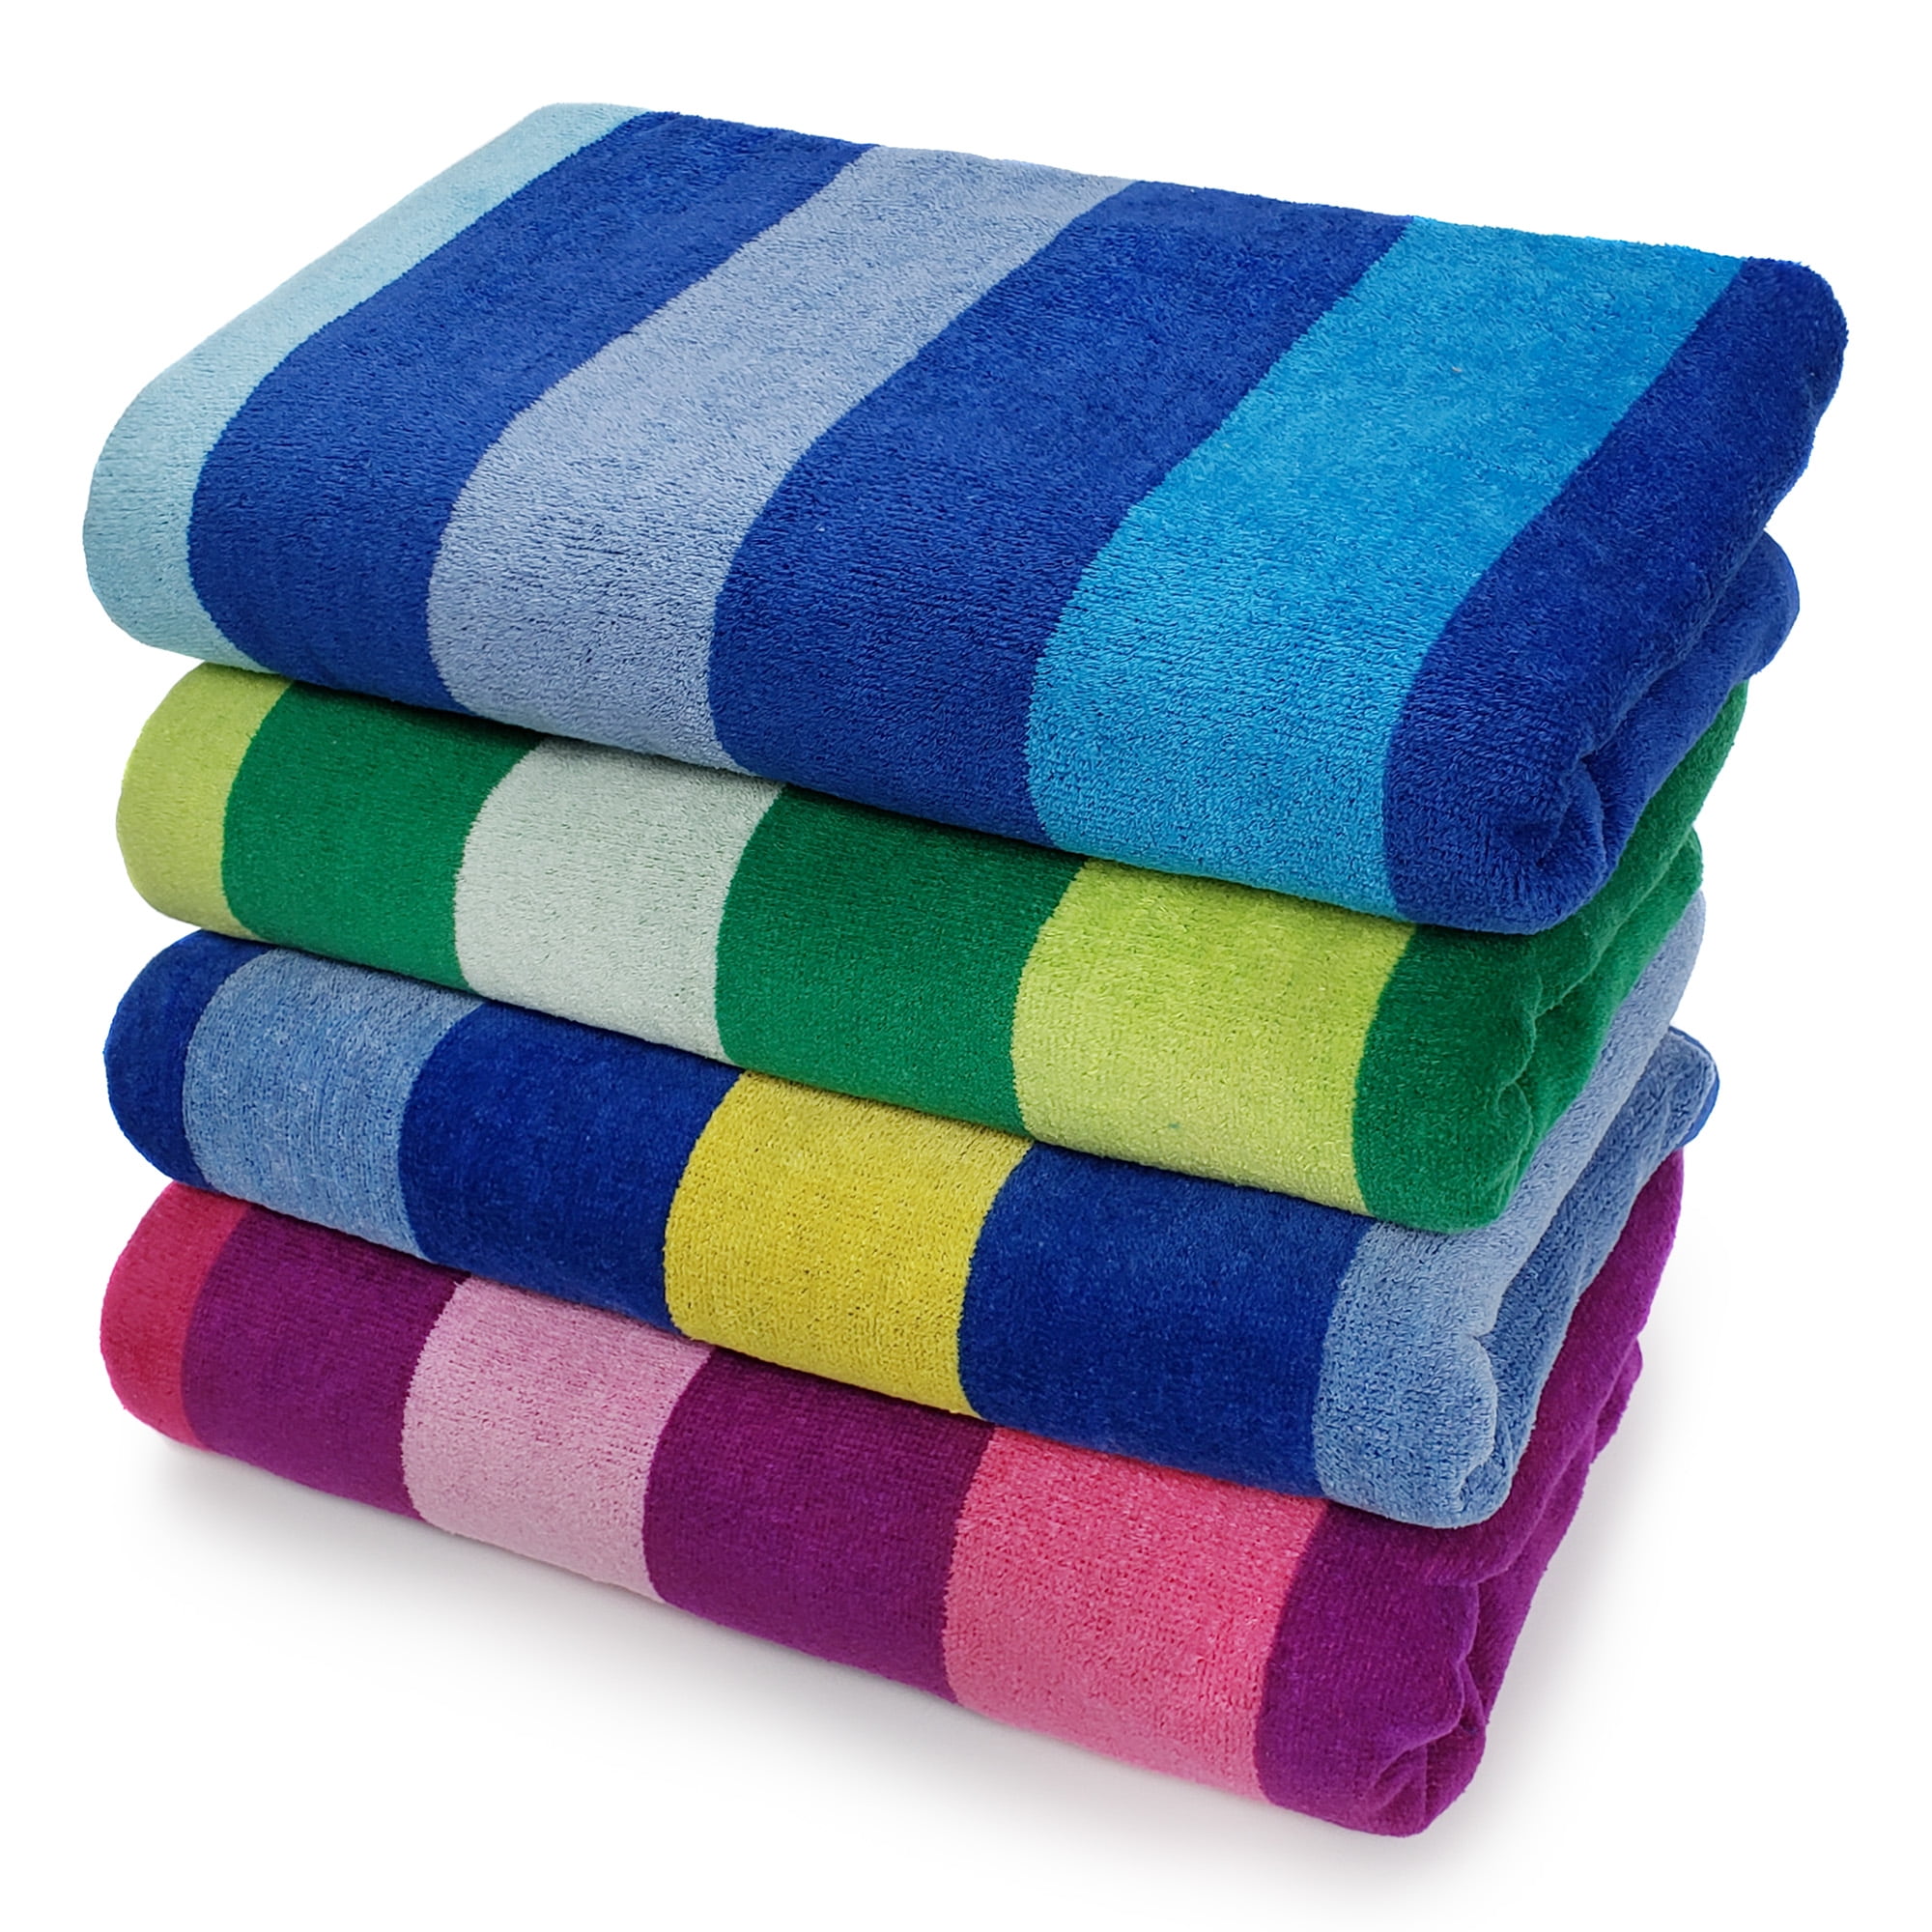 Kaufman EMBROIDERED VELOUR BEACH AND POOL TOWEL 100% COTTON 6 PACK 30"X 60". 